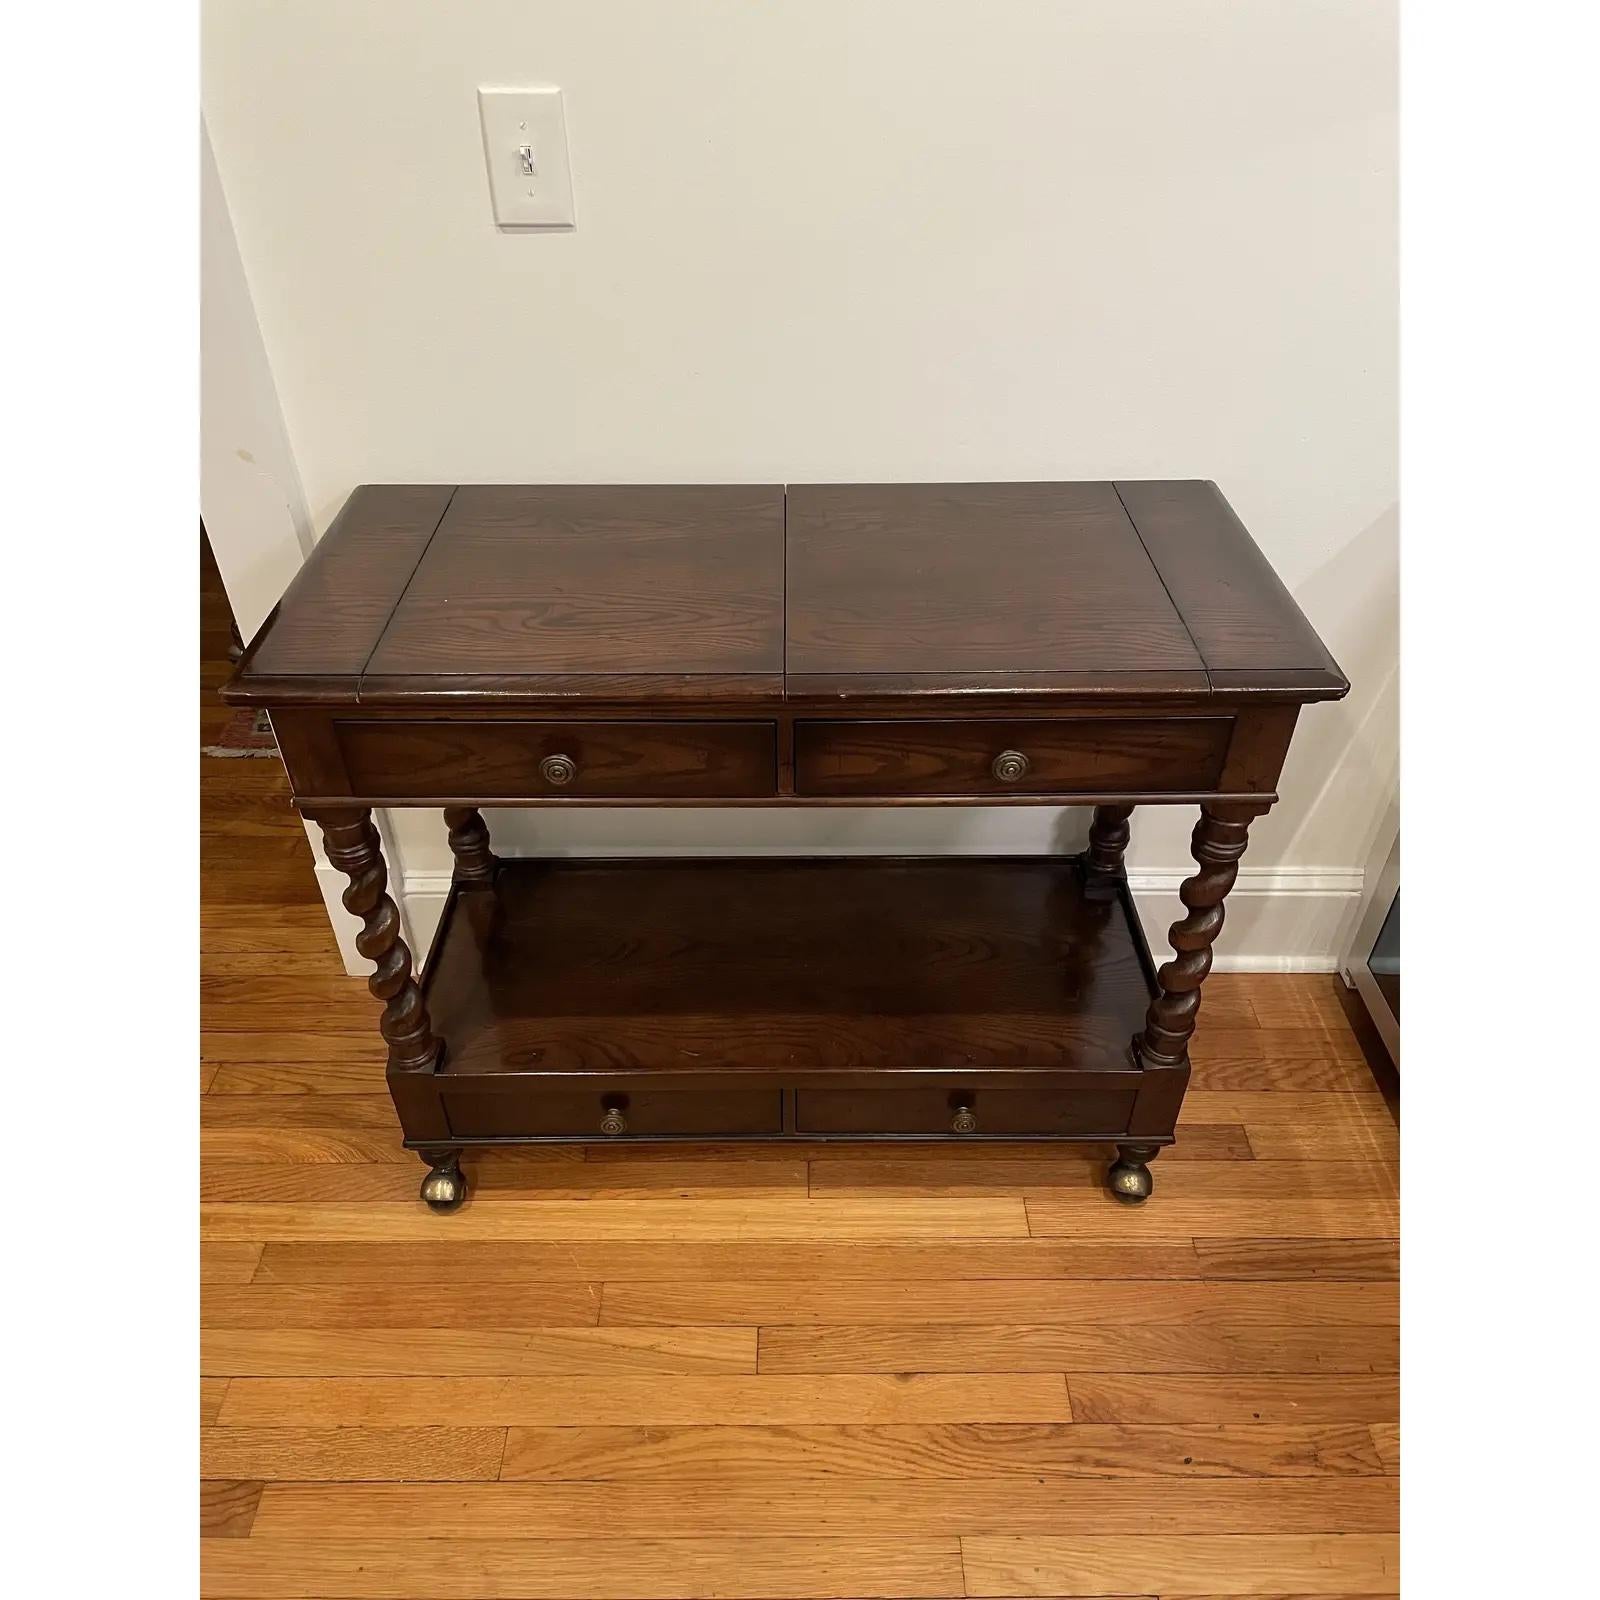 Vintage Henredon four centuries rolling buffet or server. Made of oak, featuring a flip top that opens over four barley twisted supports between two sets of drawers and large castors.

Measure: Width open - 56